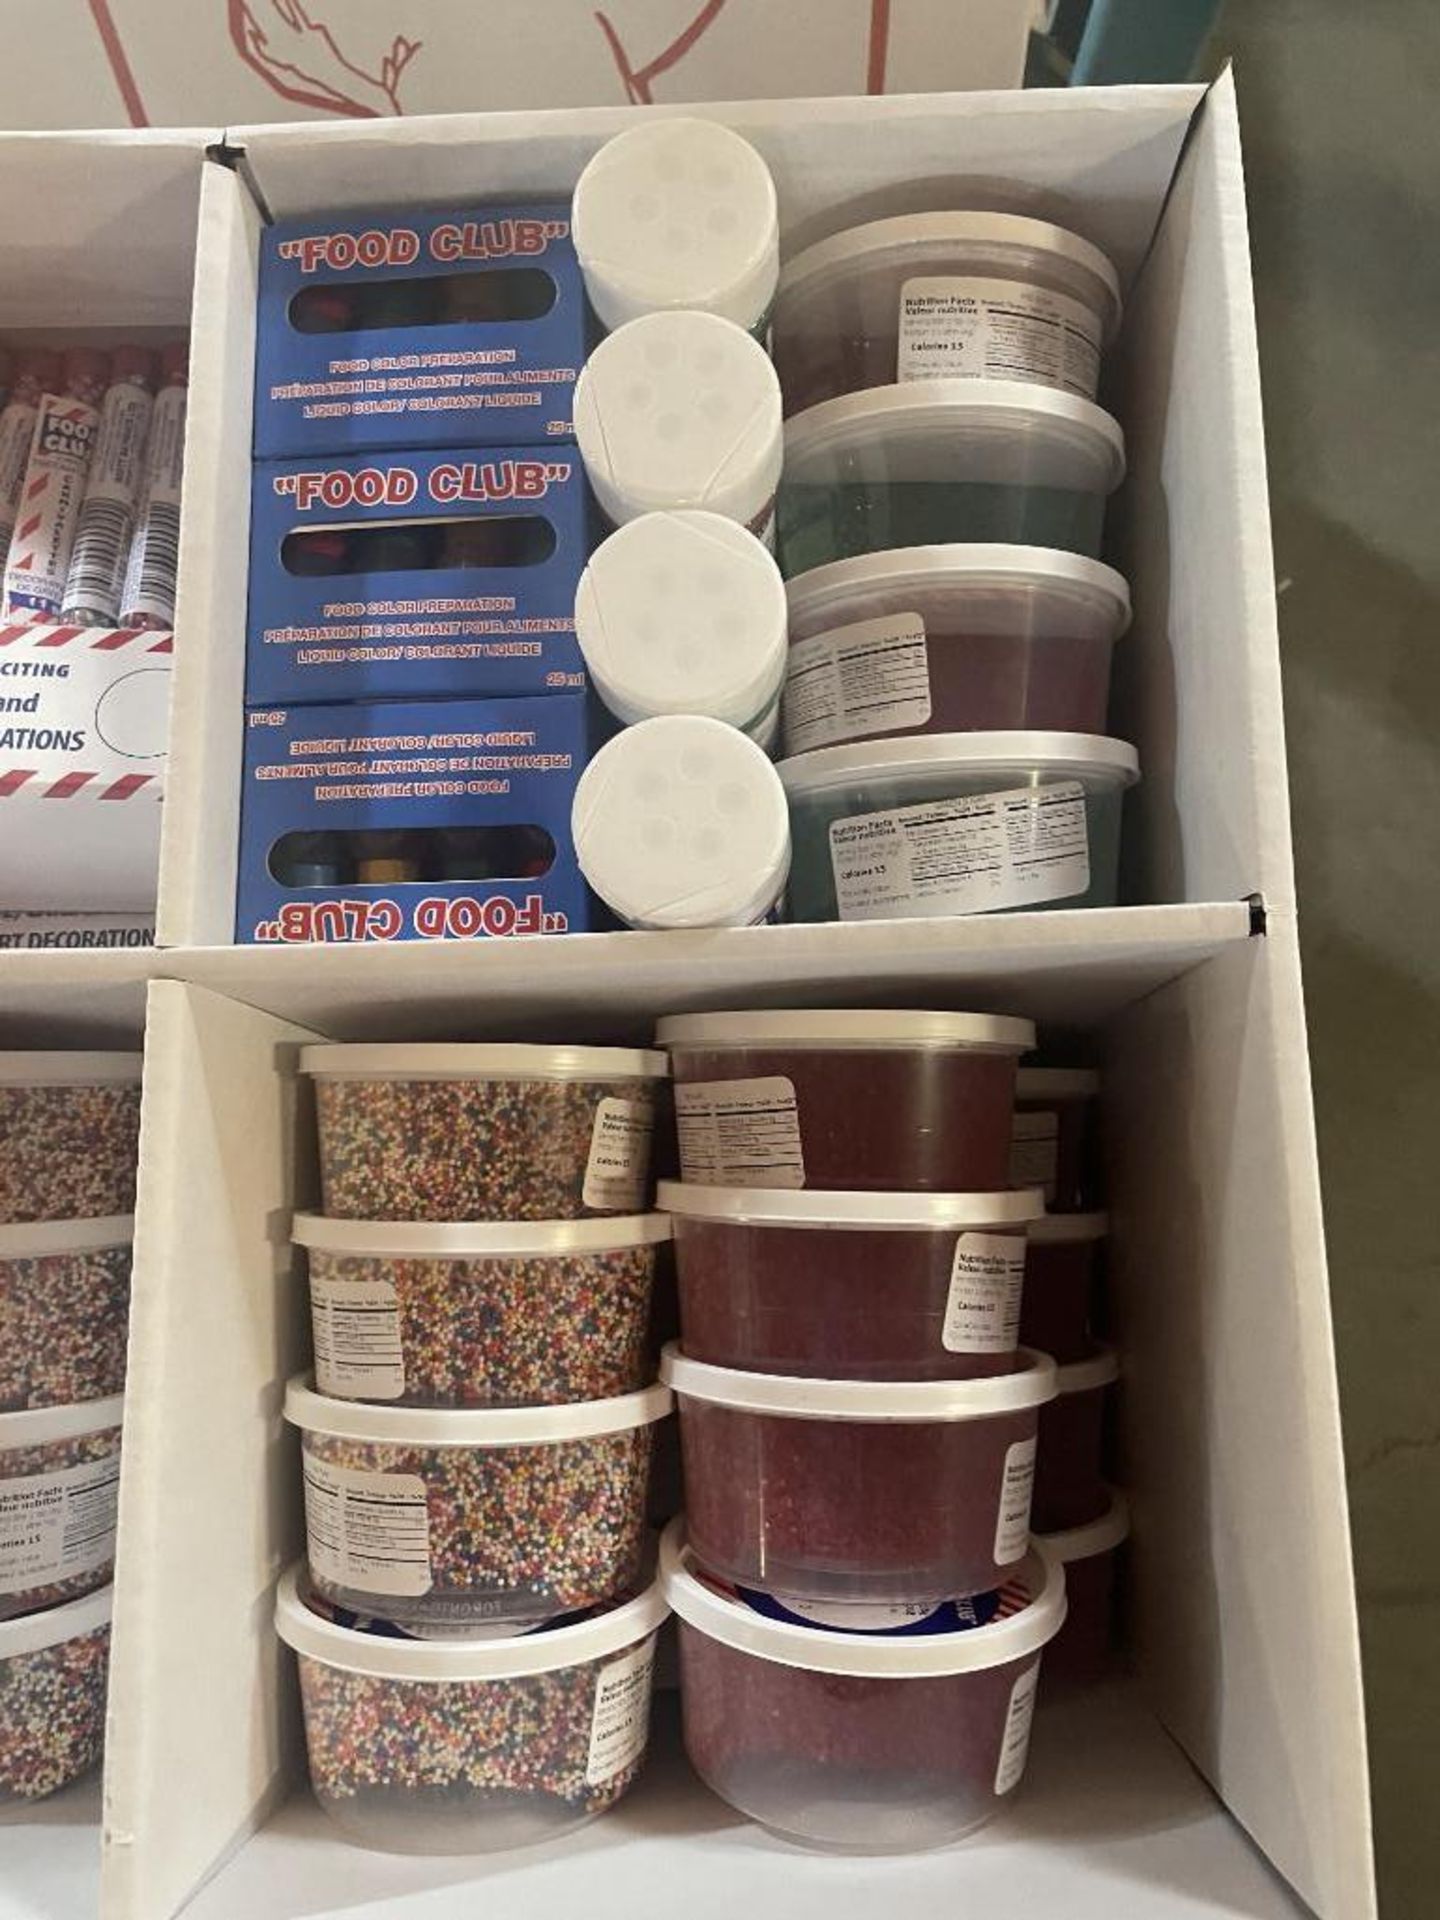 (4) NUTTY CLUB BAKING SUPPLIES FREESTANDING RETAIL DISPLAY - Image 5 of 7